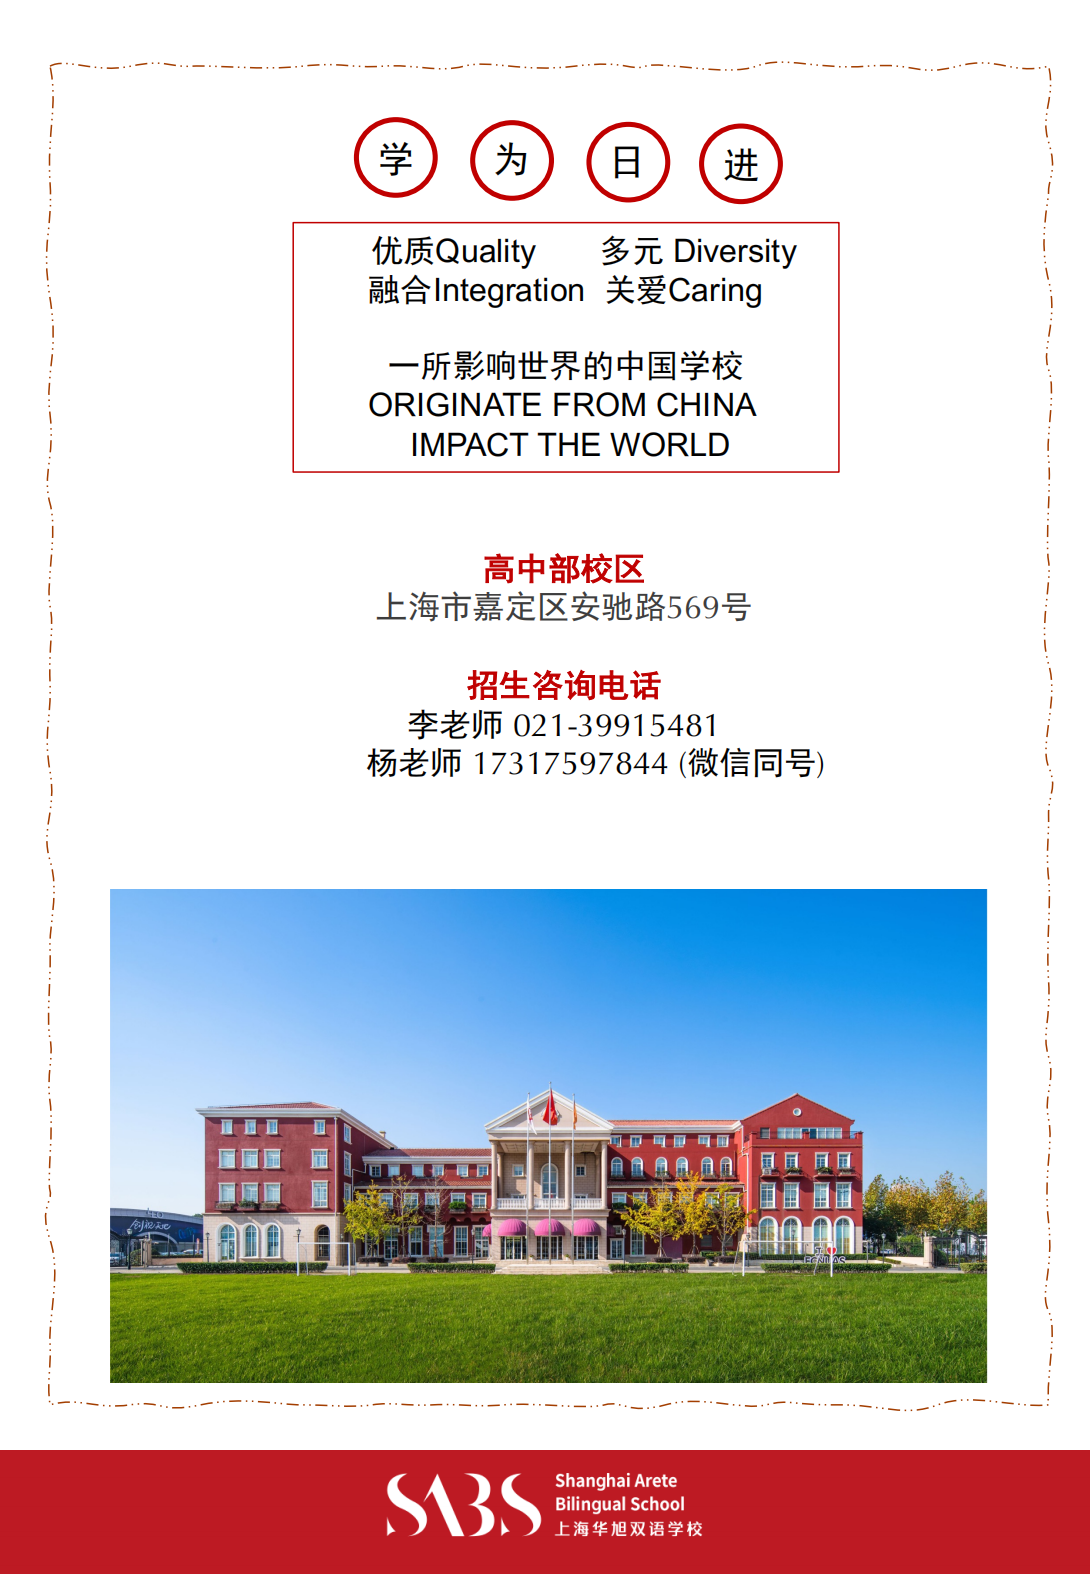 HS 5th Issue Newsletter pptx（English）_16.png